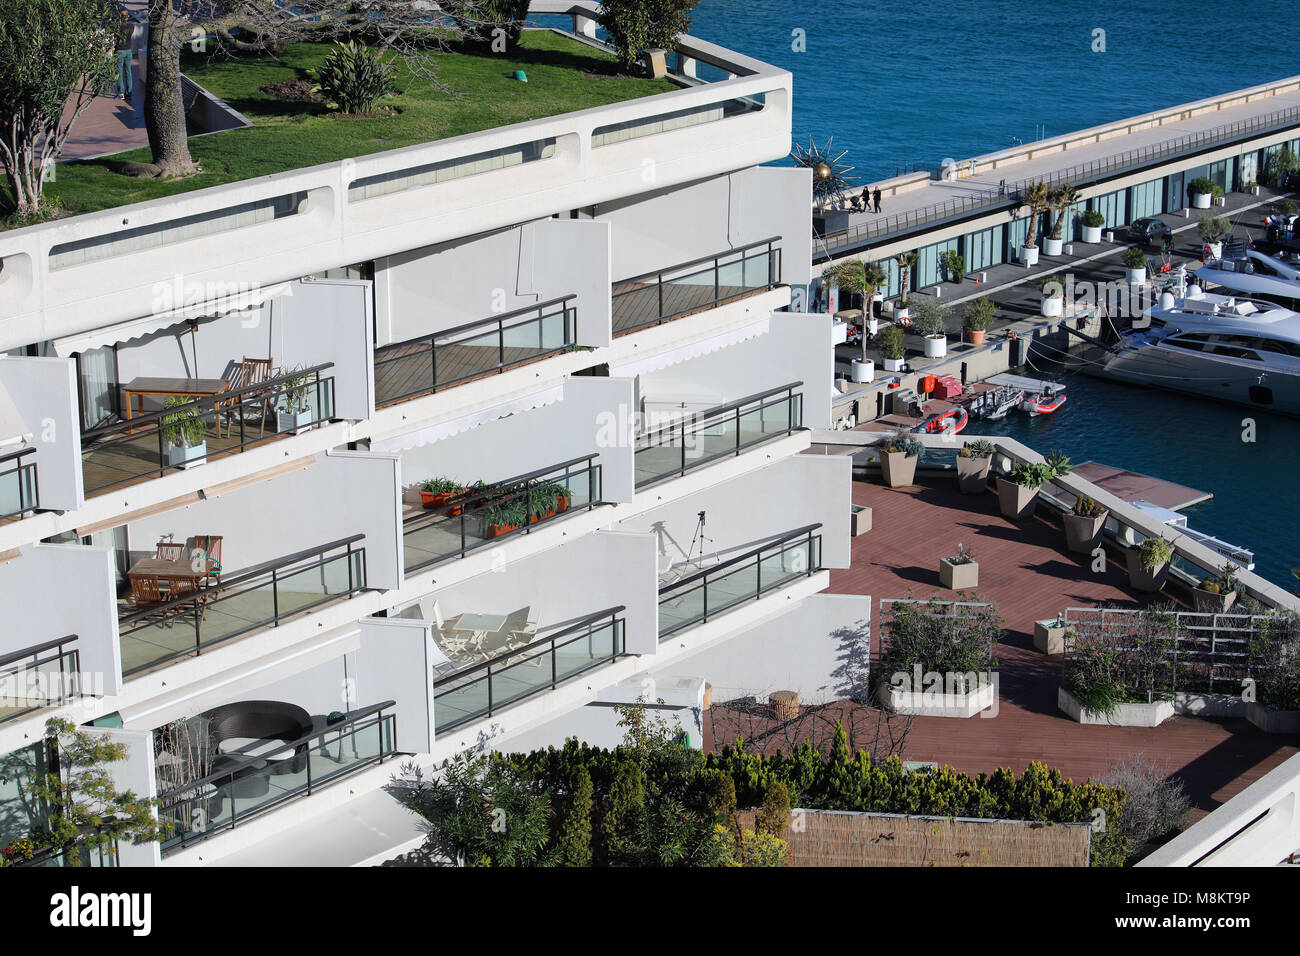 Monte-Carlo, Monaco - March 17, 2018: Luxury Seaview Balcony Apartment With Aerial View of The Mediterranean Sea And Yachts In The Monte-Carlo Harbour Stock Photo